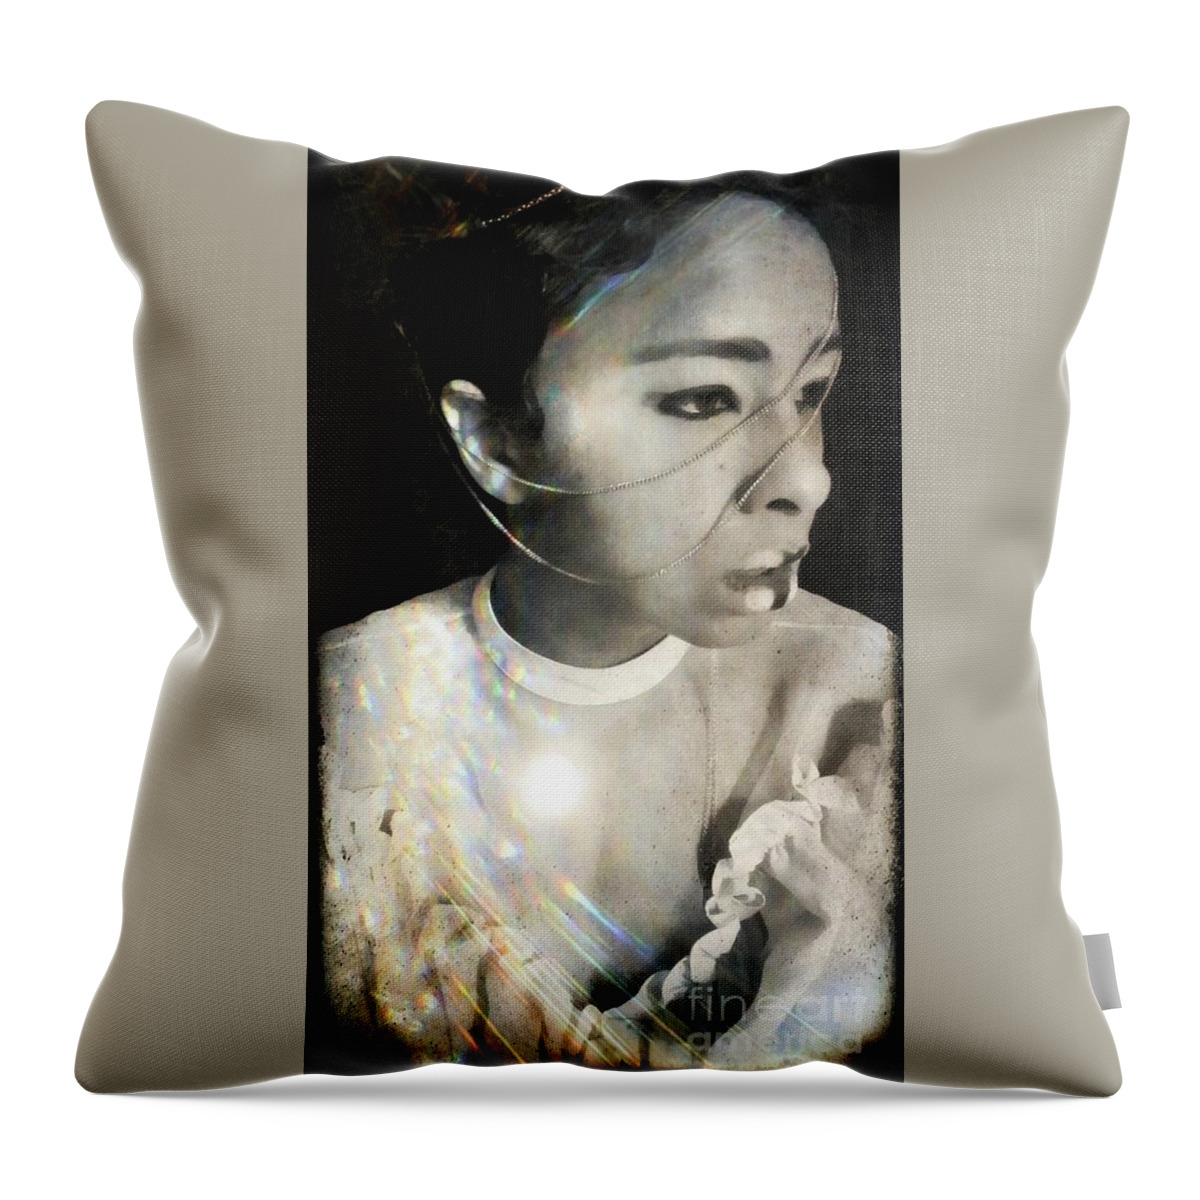  Throw Pillow featuring the photograph It Never was for me by Jessica S